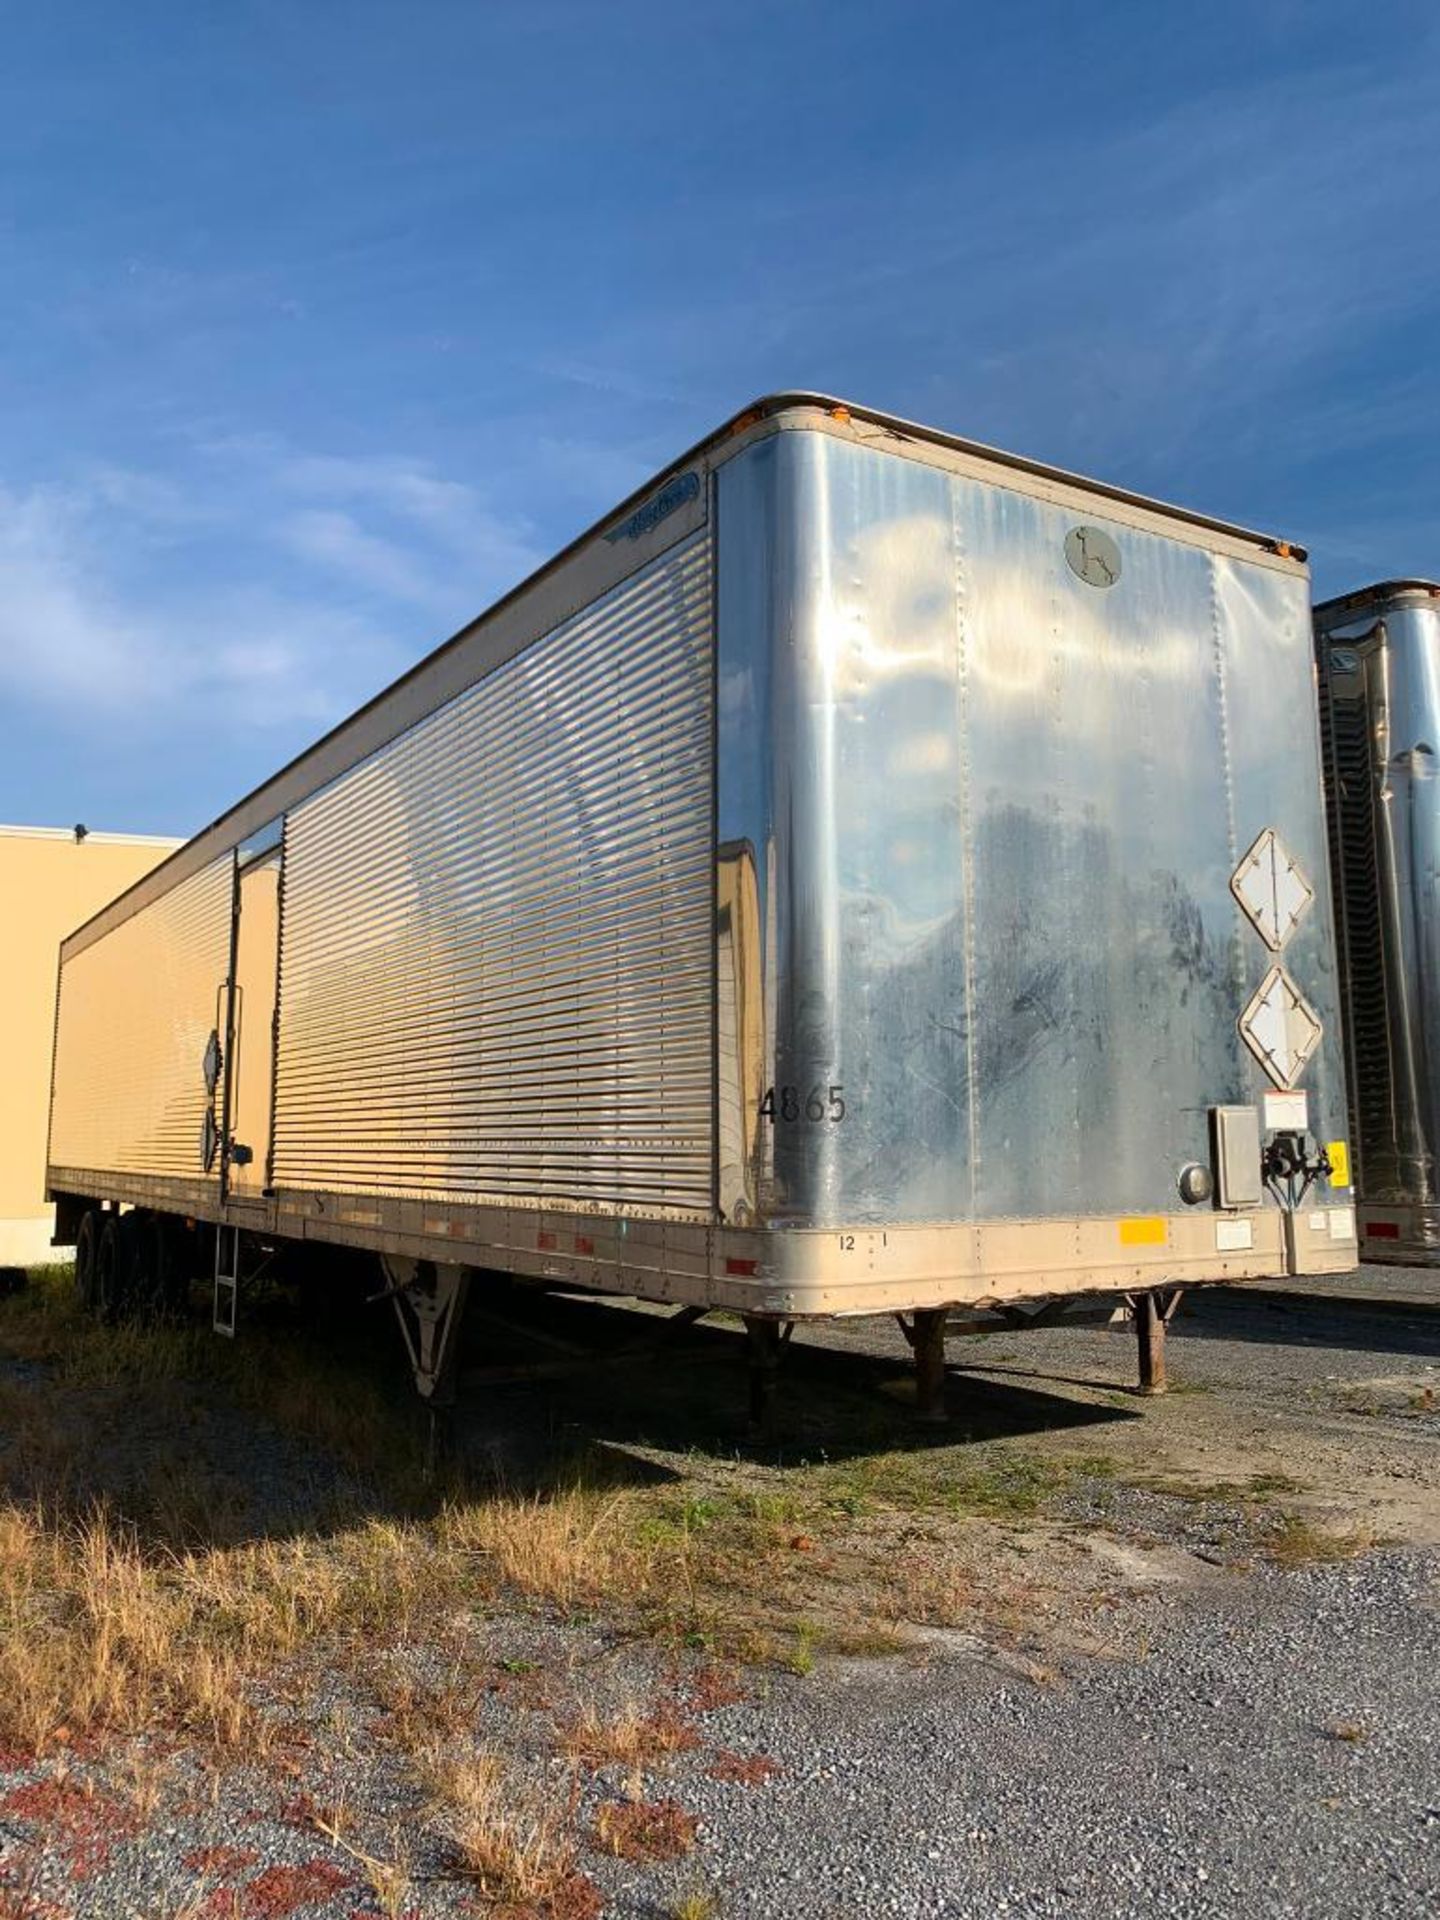 2000 Great Dane Dry Van Trailer, 48' (Not Road Worthy, Used For Storage) (No Title)